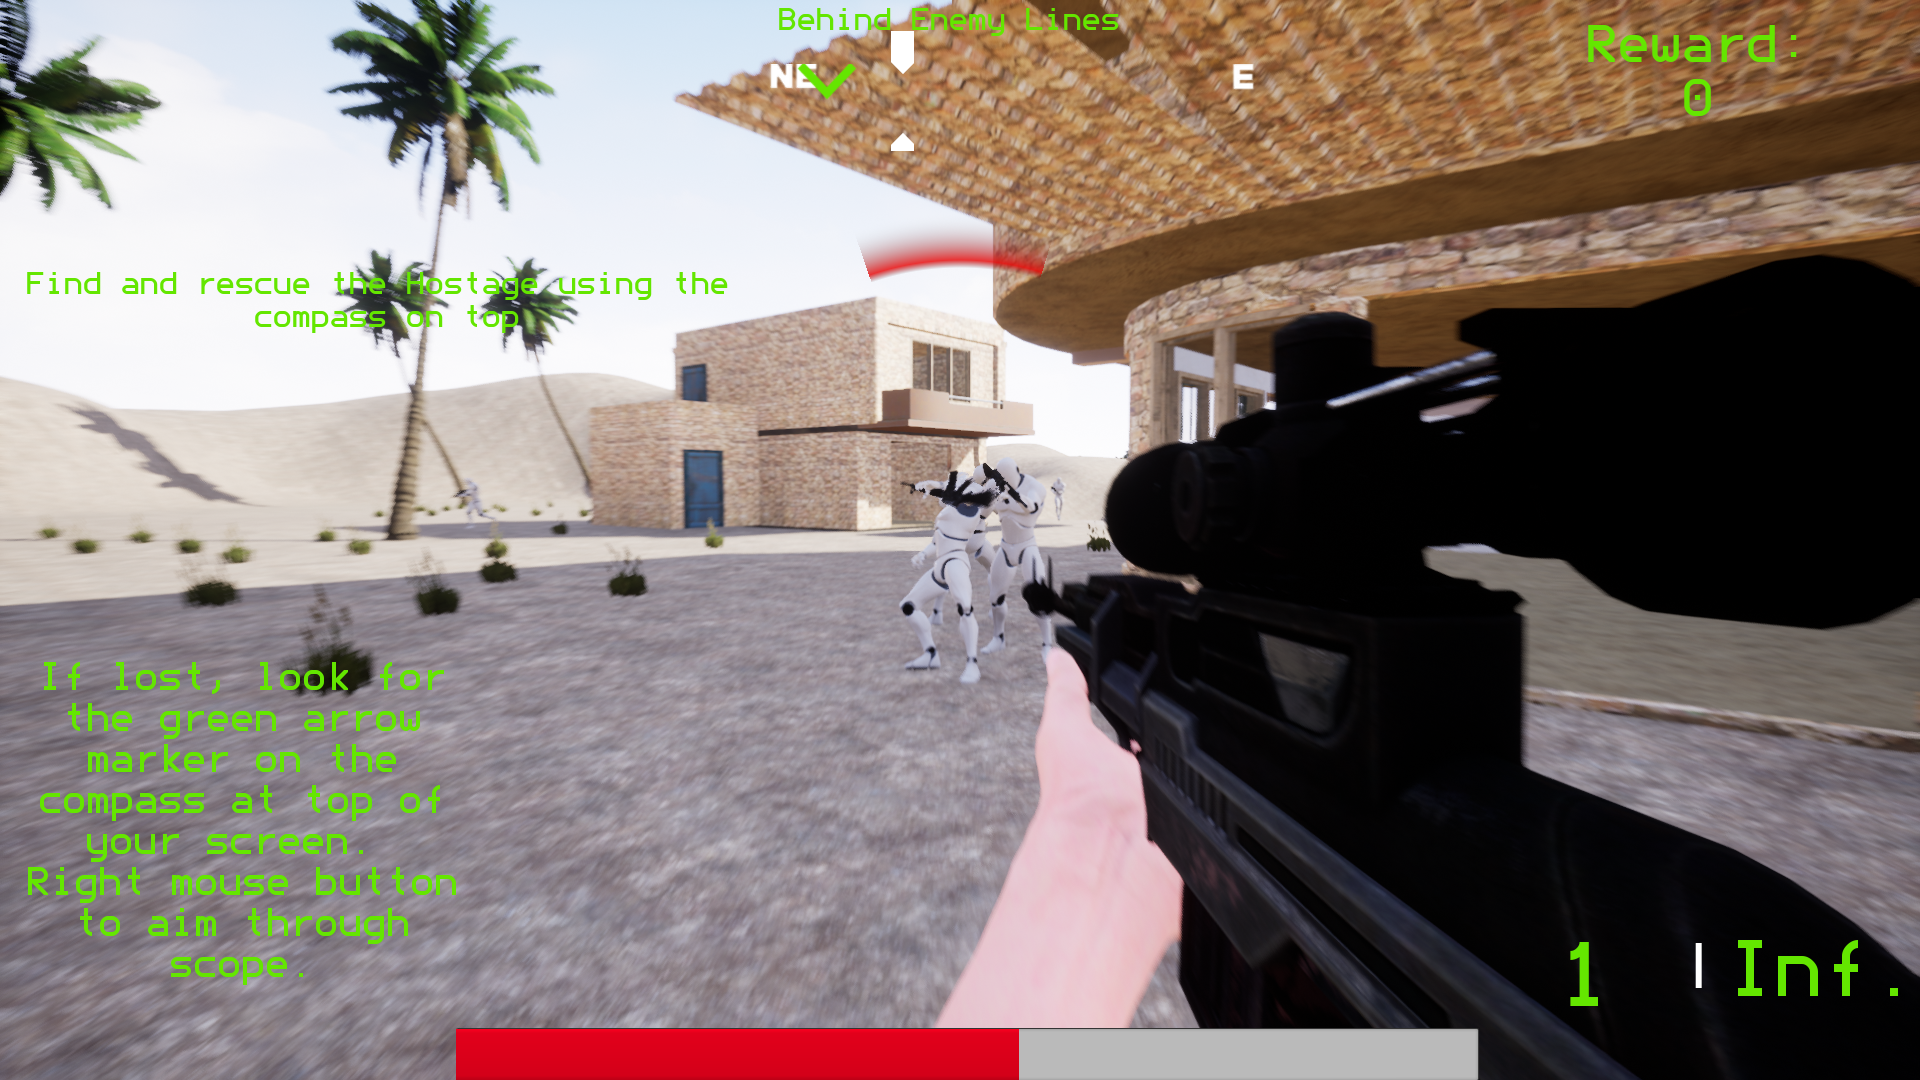 PHANTOM FORCES BUT IT'S THE FUTURE 